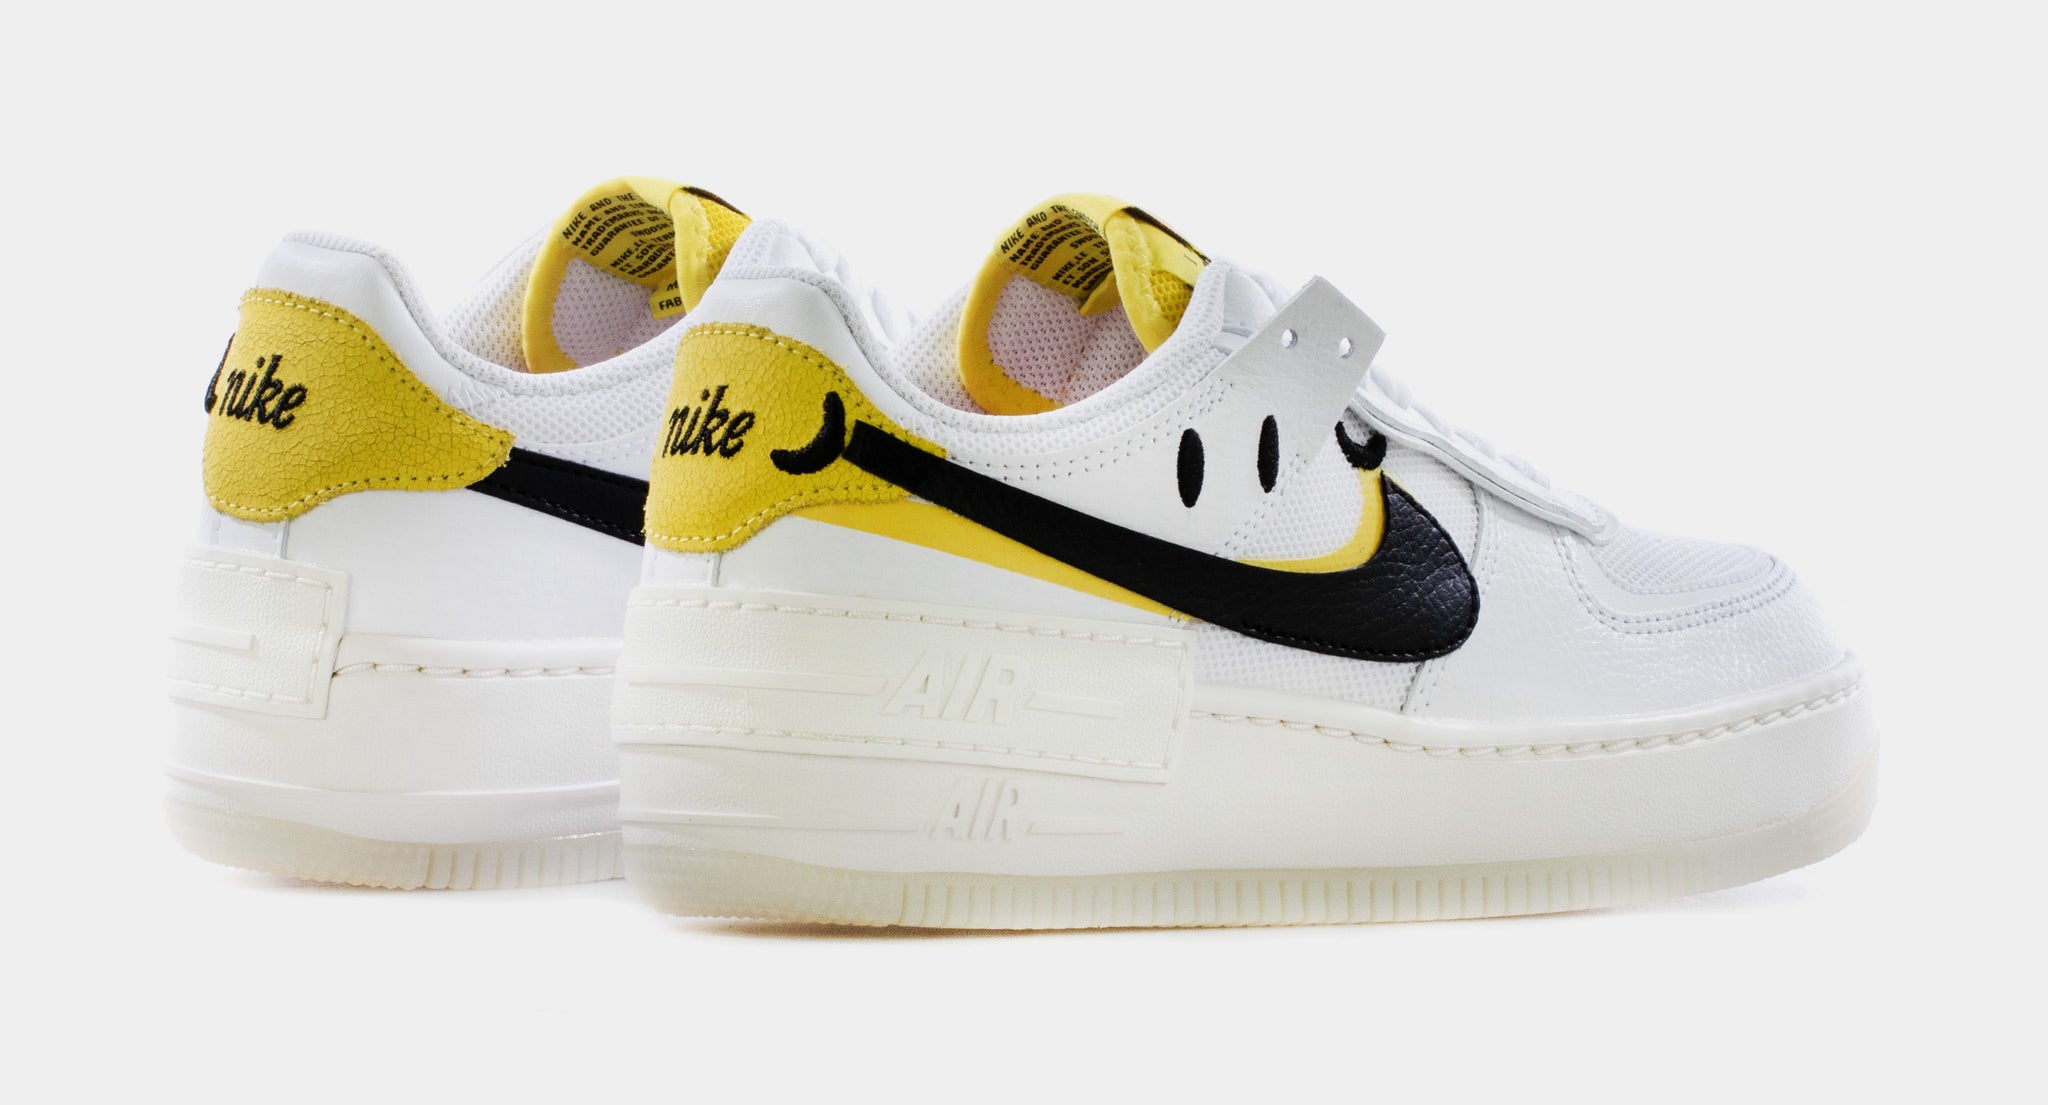 Nike Air Force 1 Shadow Smile Women's Shoes, White/Yellow, Size: 8.5